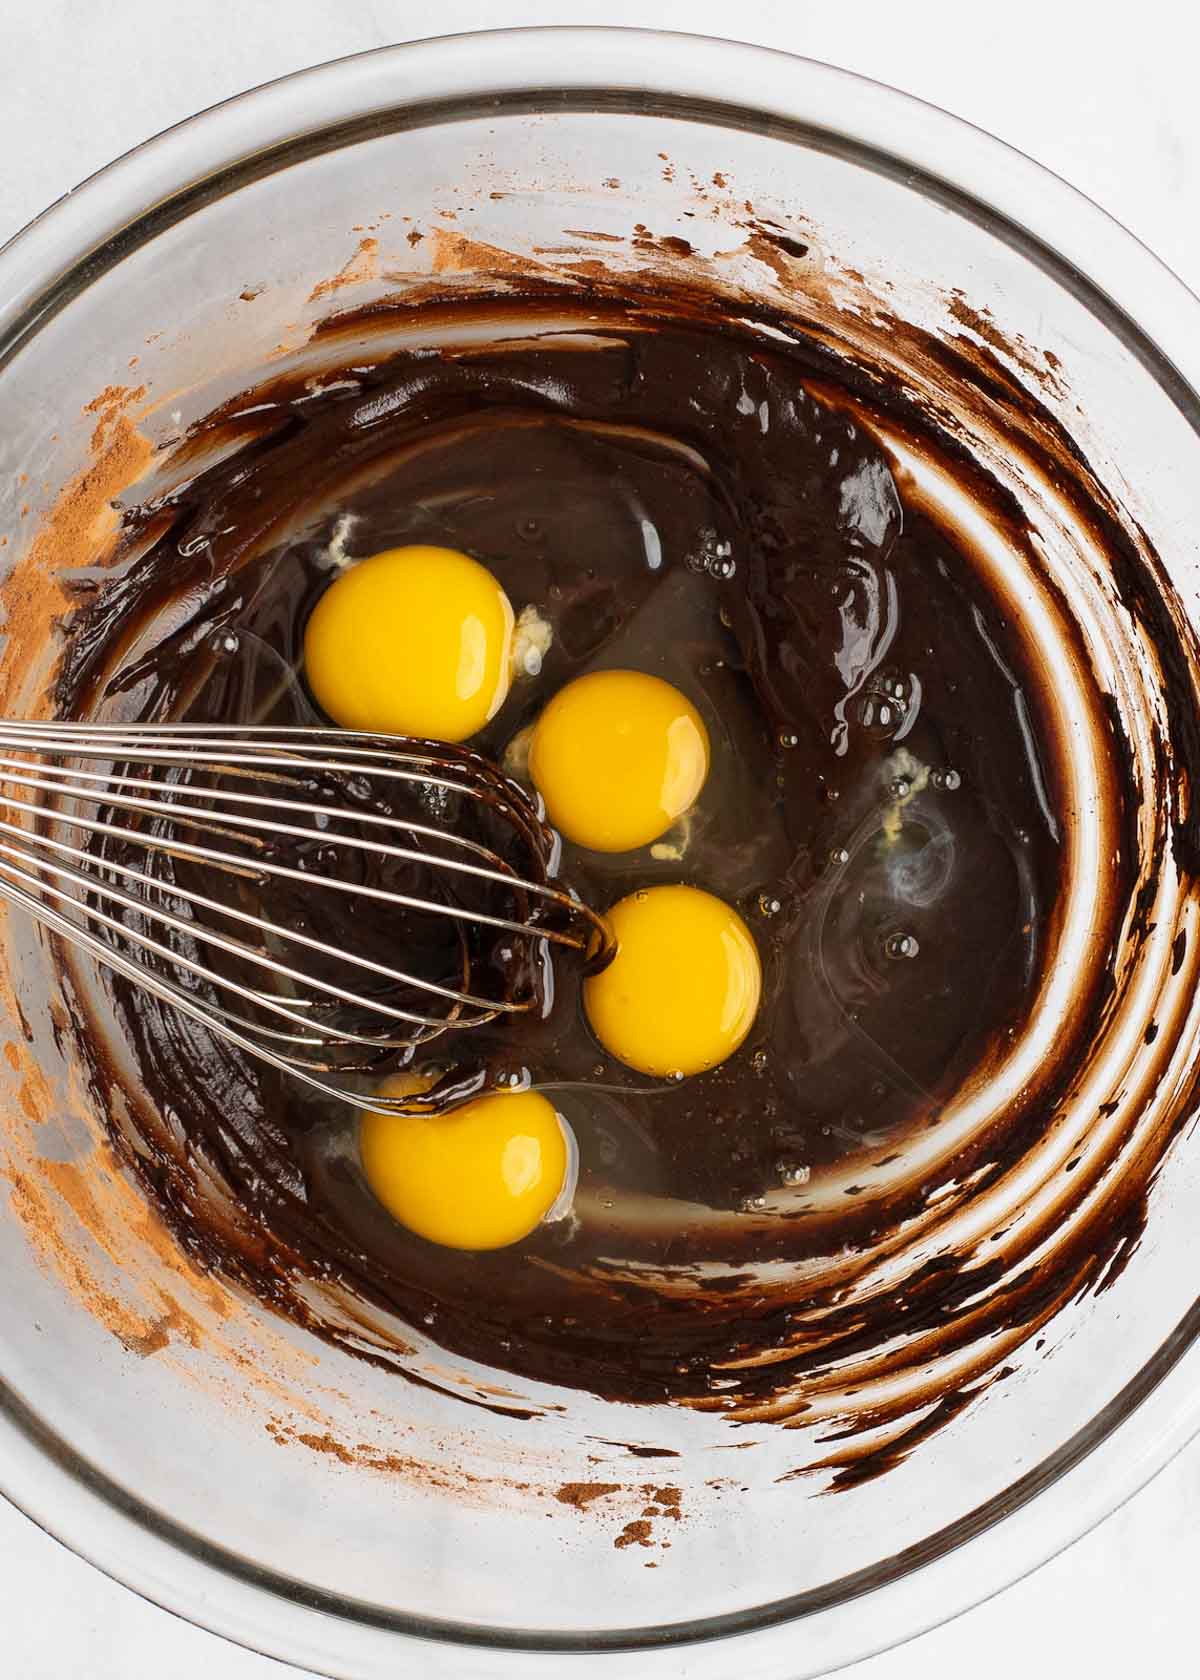 Overhead view of four eggs in a mixing bowl, on top of cocoa powder mixed with butter